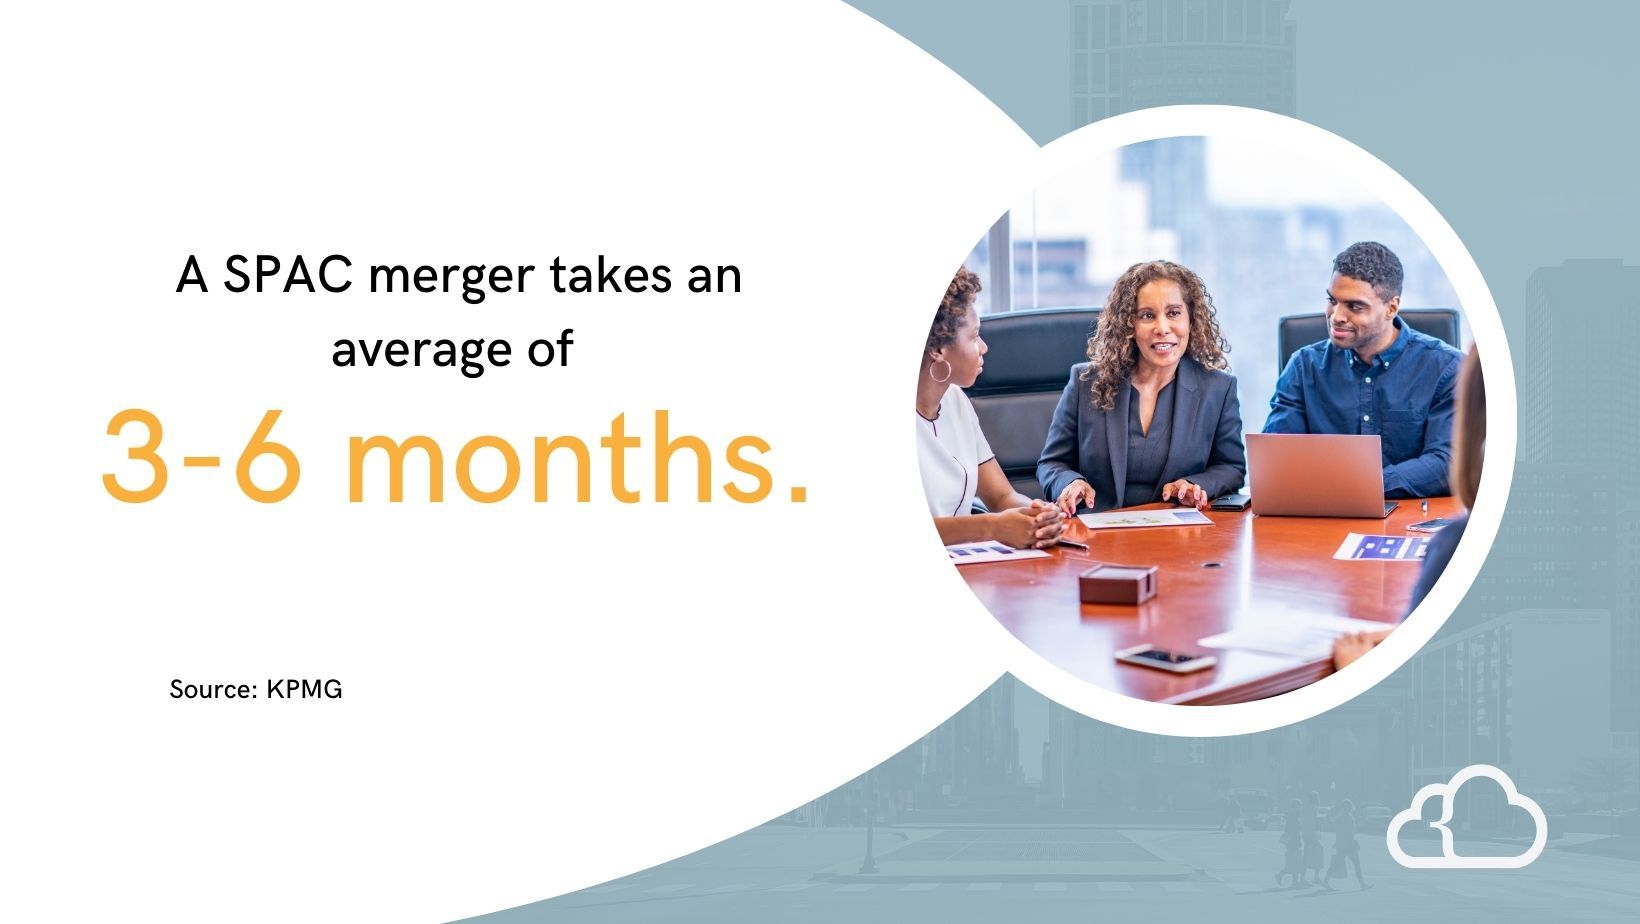 Graphic stating that a deSPAC merger takes an average of 3-6 months. 